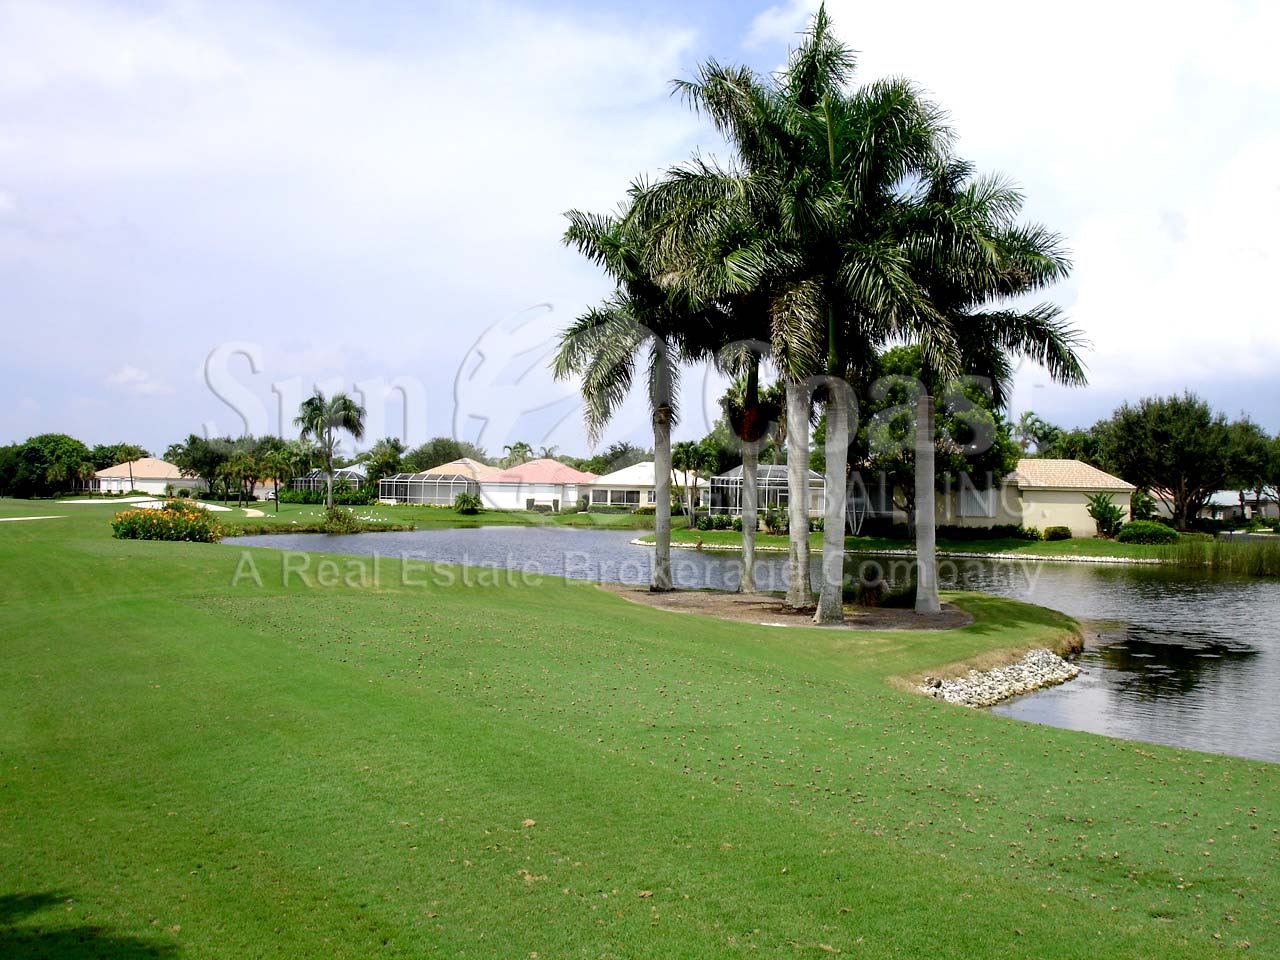 Ketch Cay is a non gated community within the gated community of Windstar.